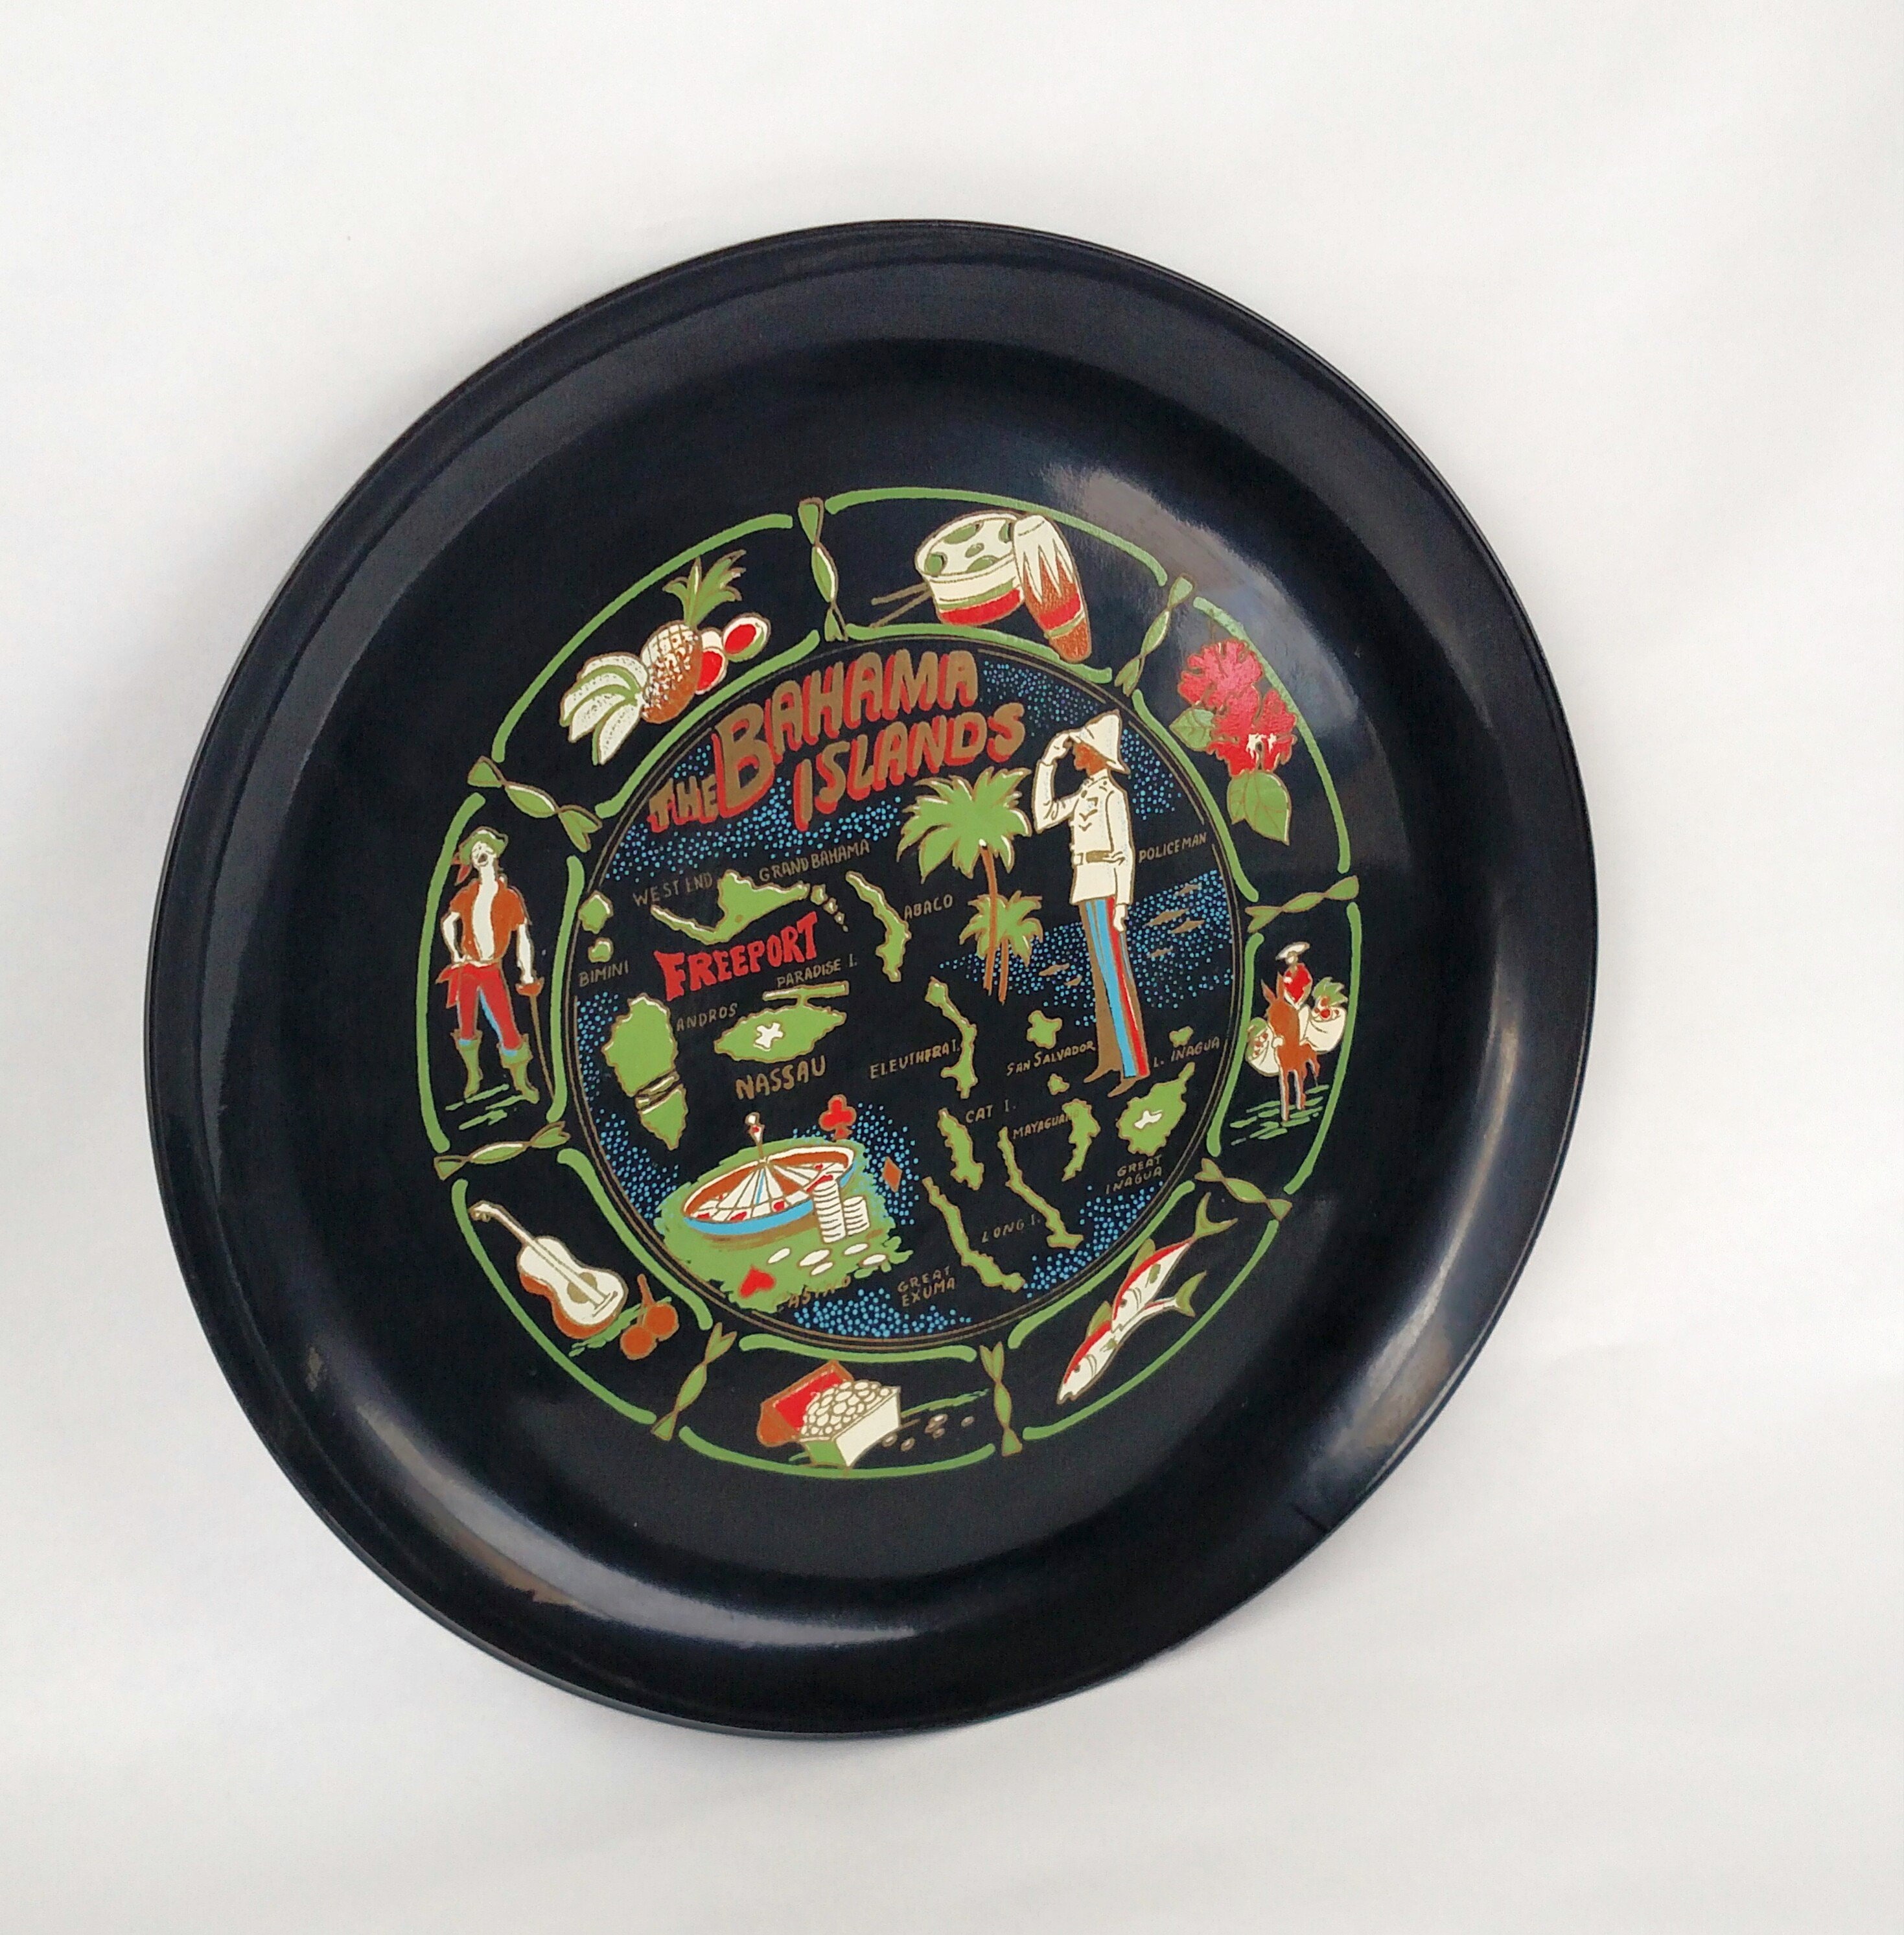 Vintage Souvenir Plate from The Bahamas featuring Colorful Kitschy ...